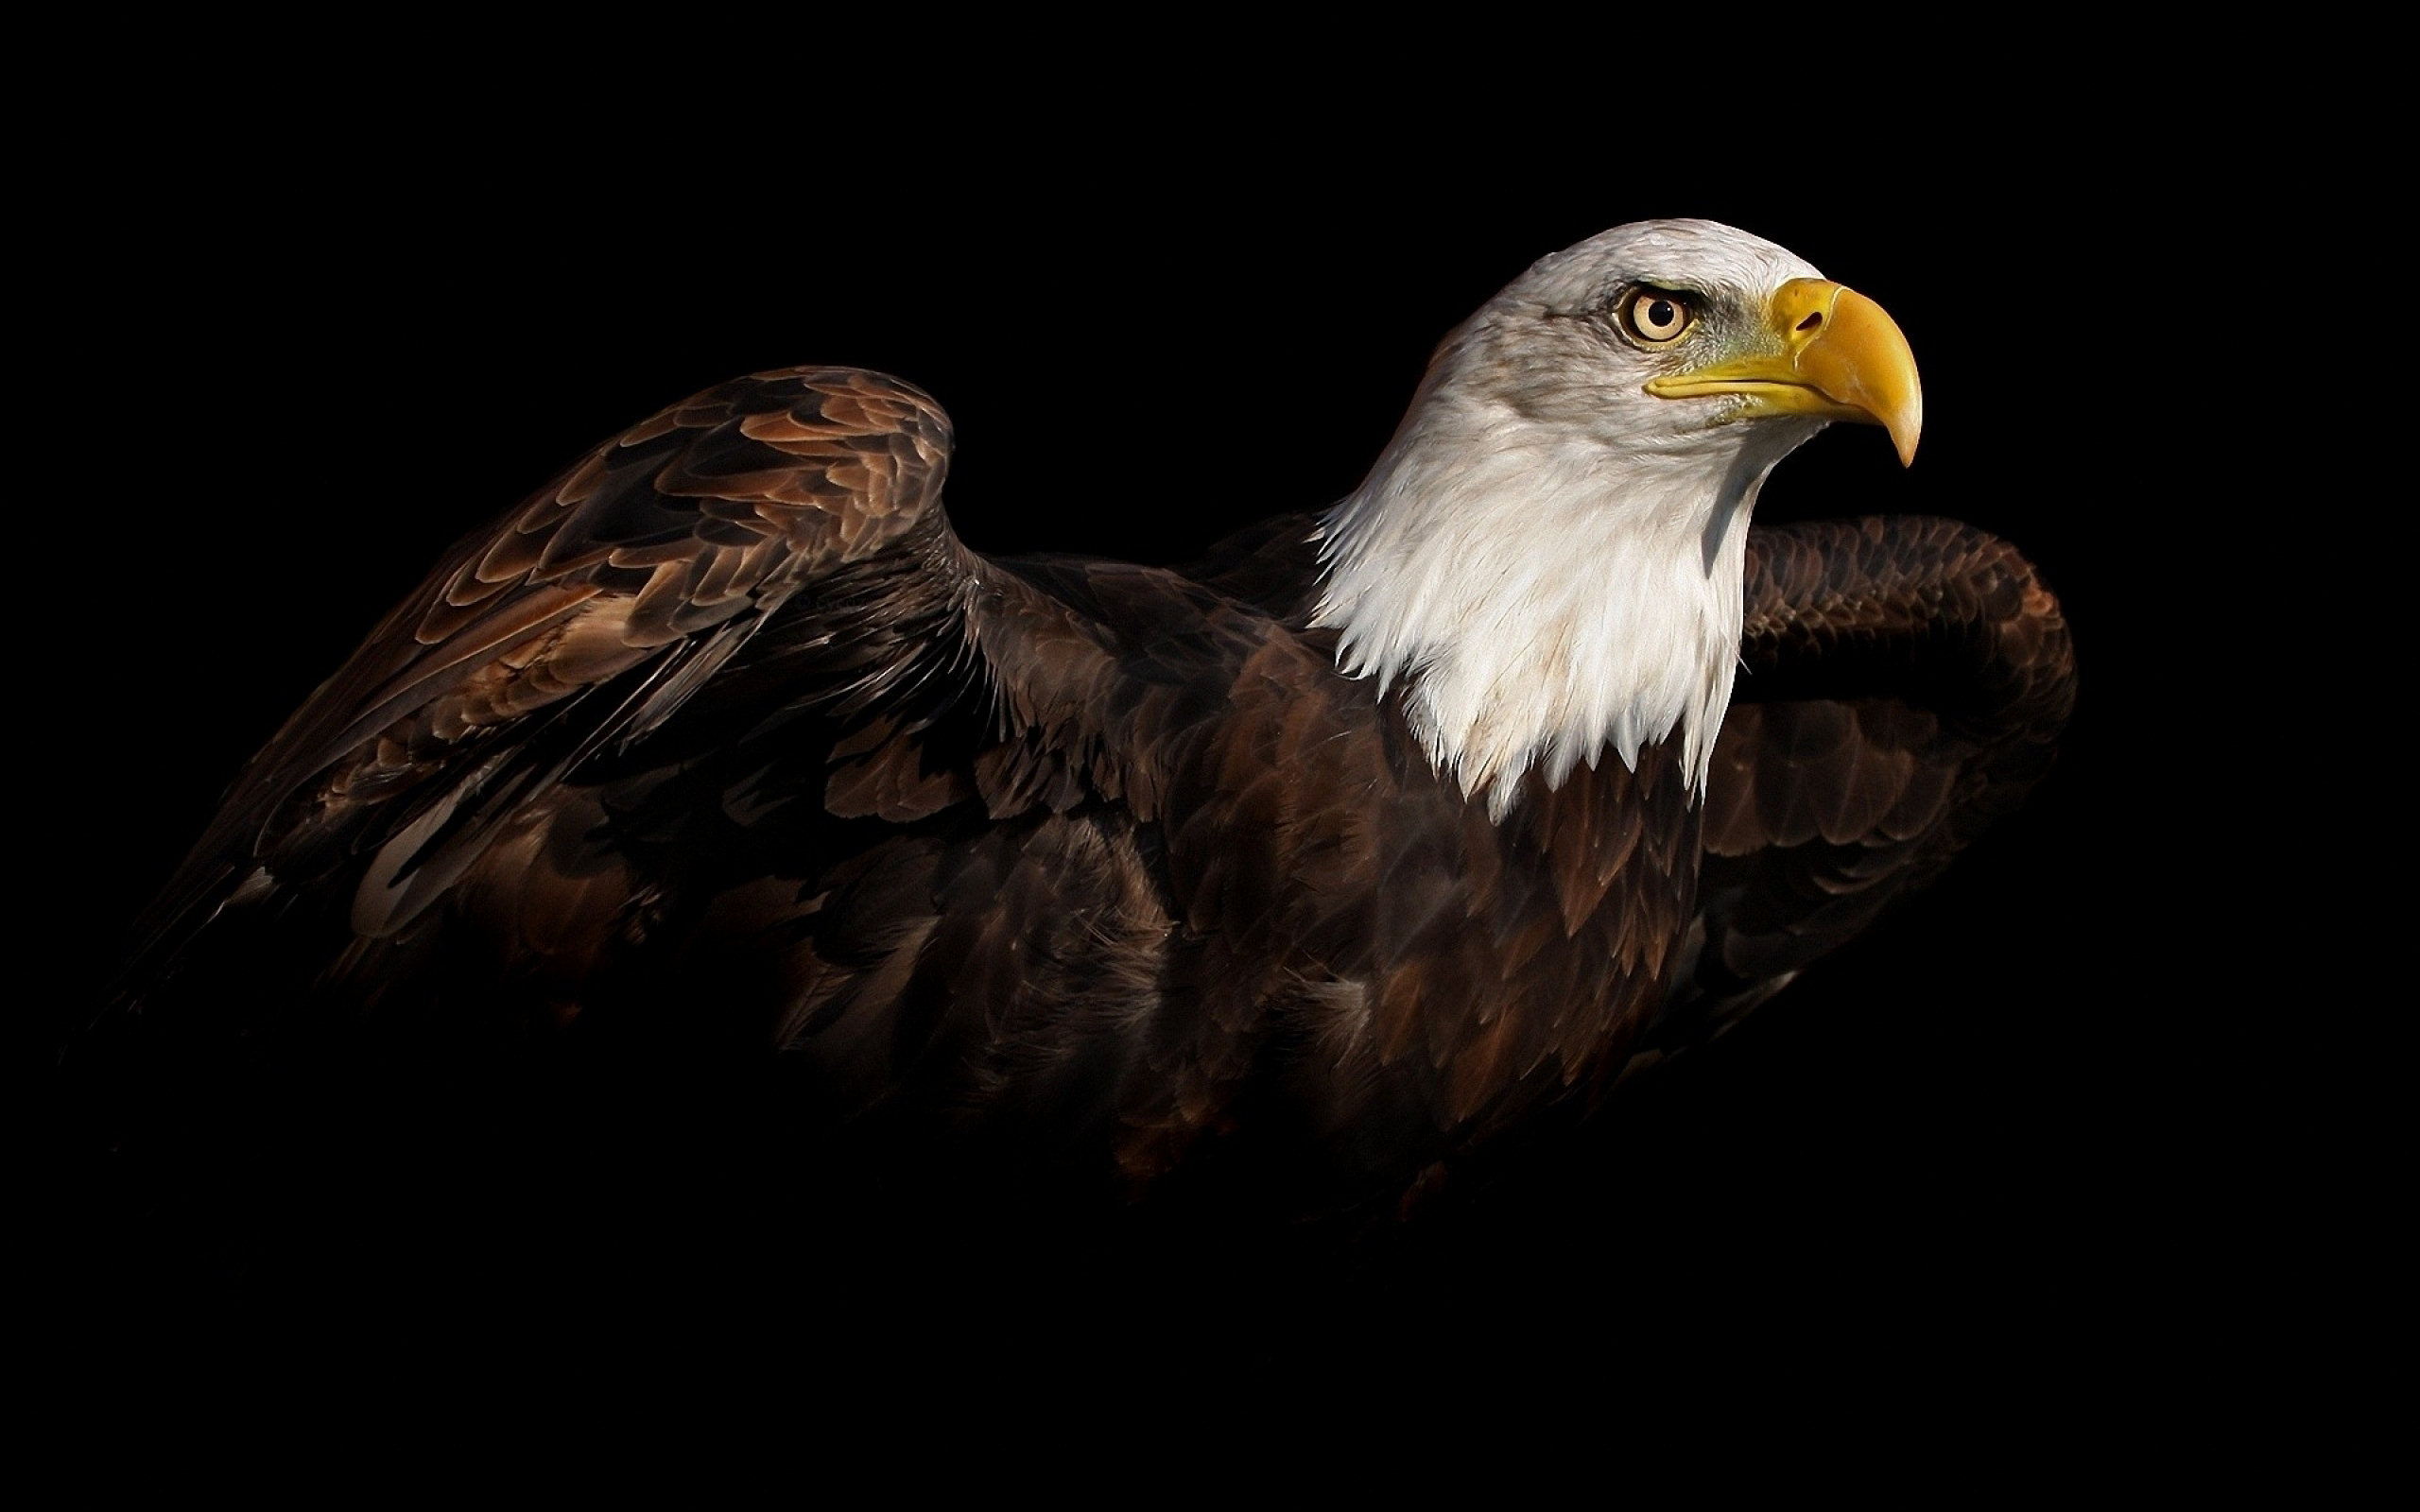 American Eagle Hd Wallpapers